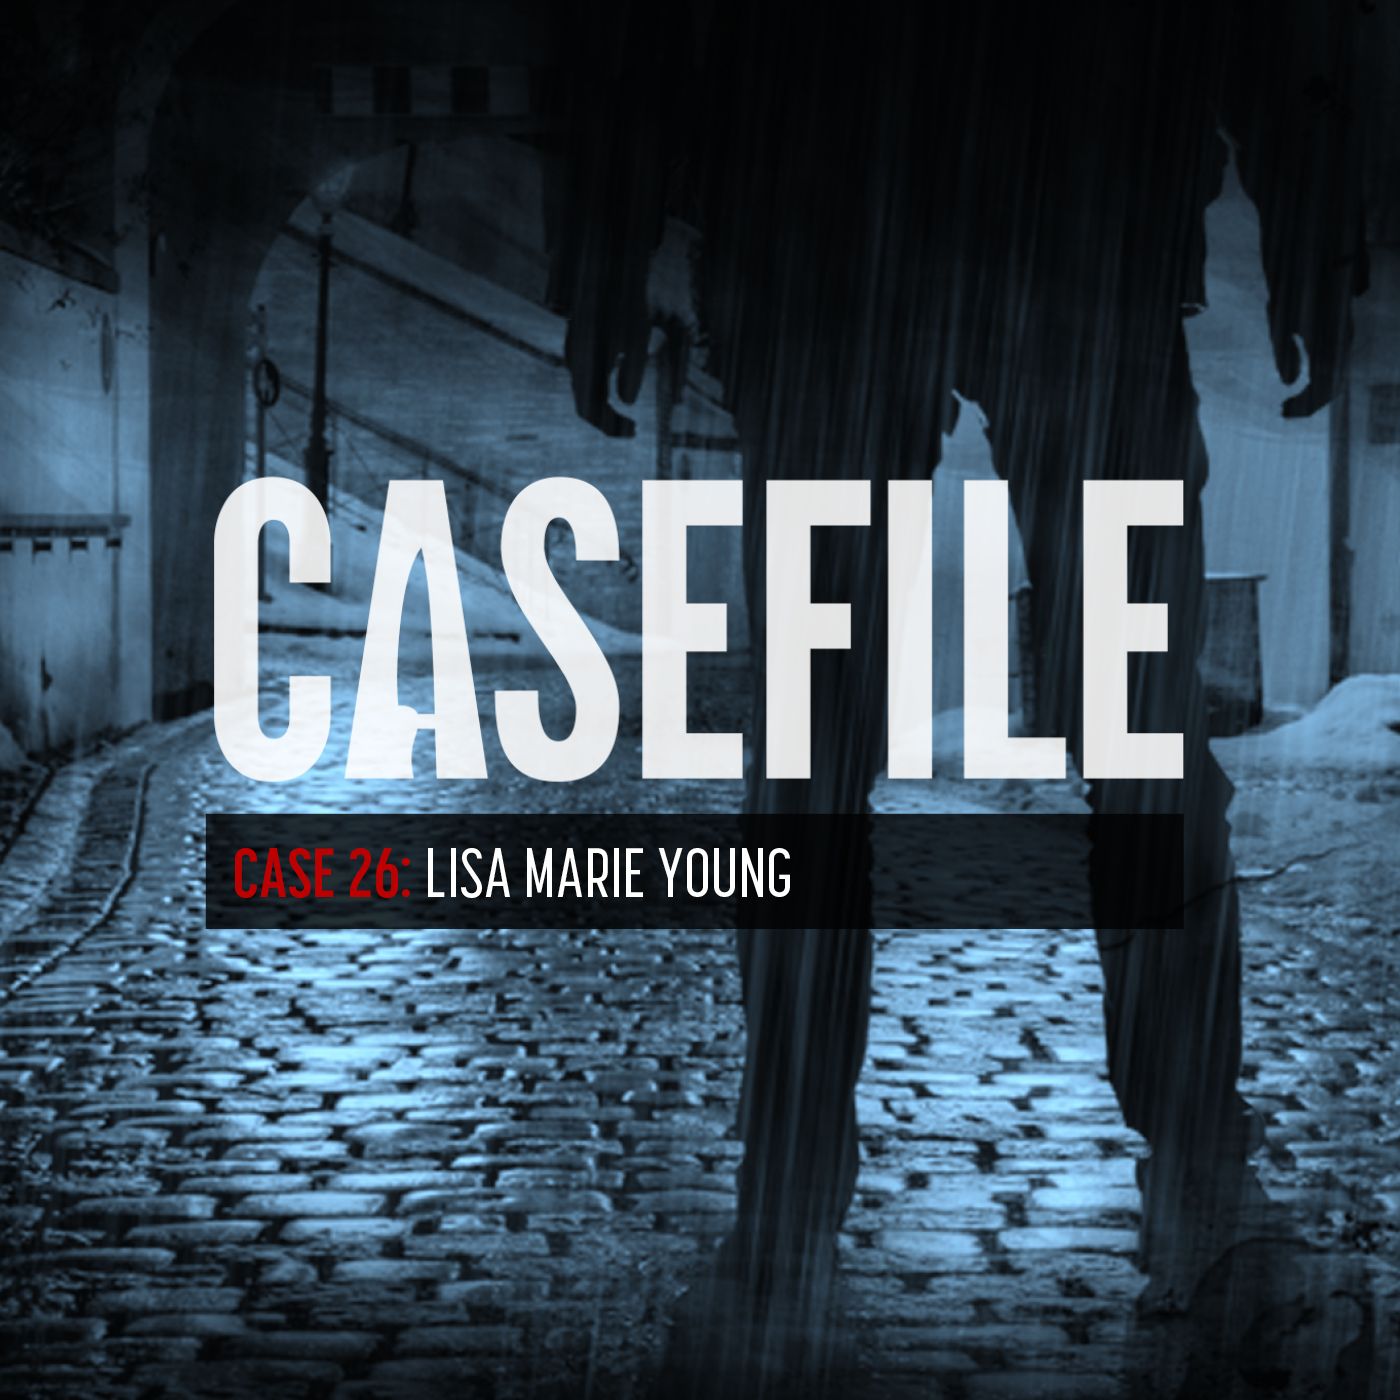 Case 26: Lisa Marie Young